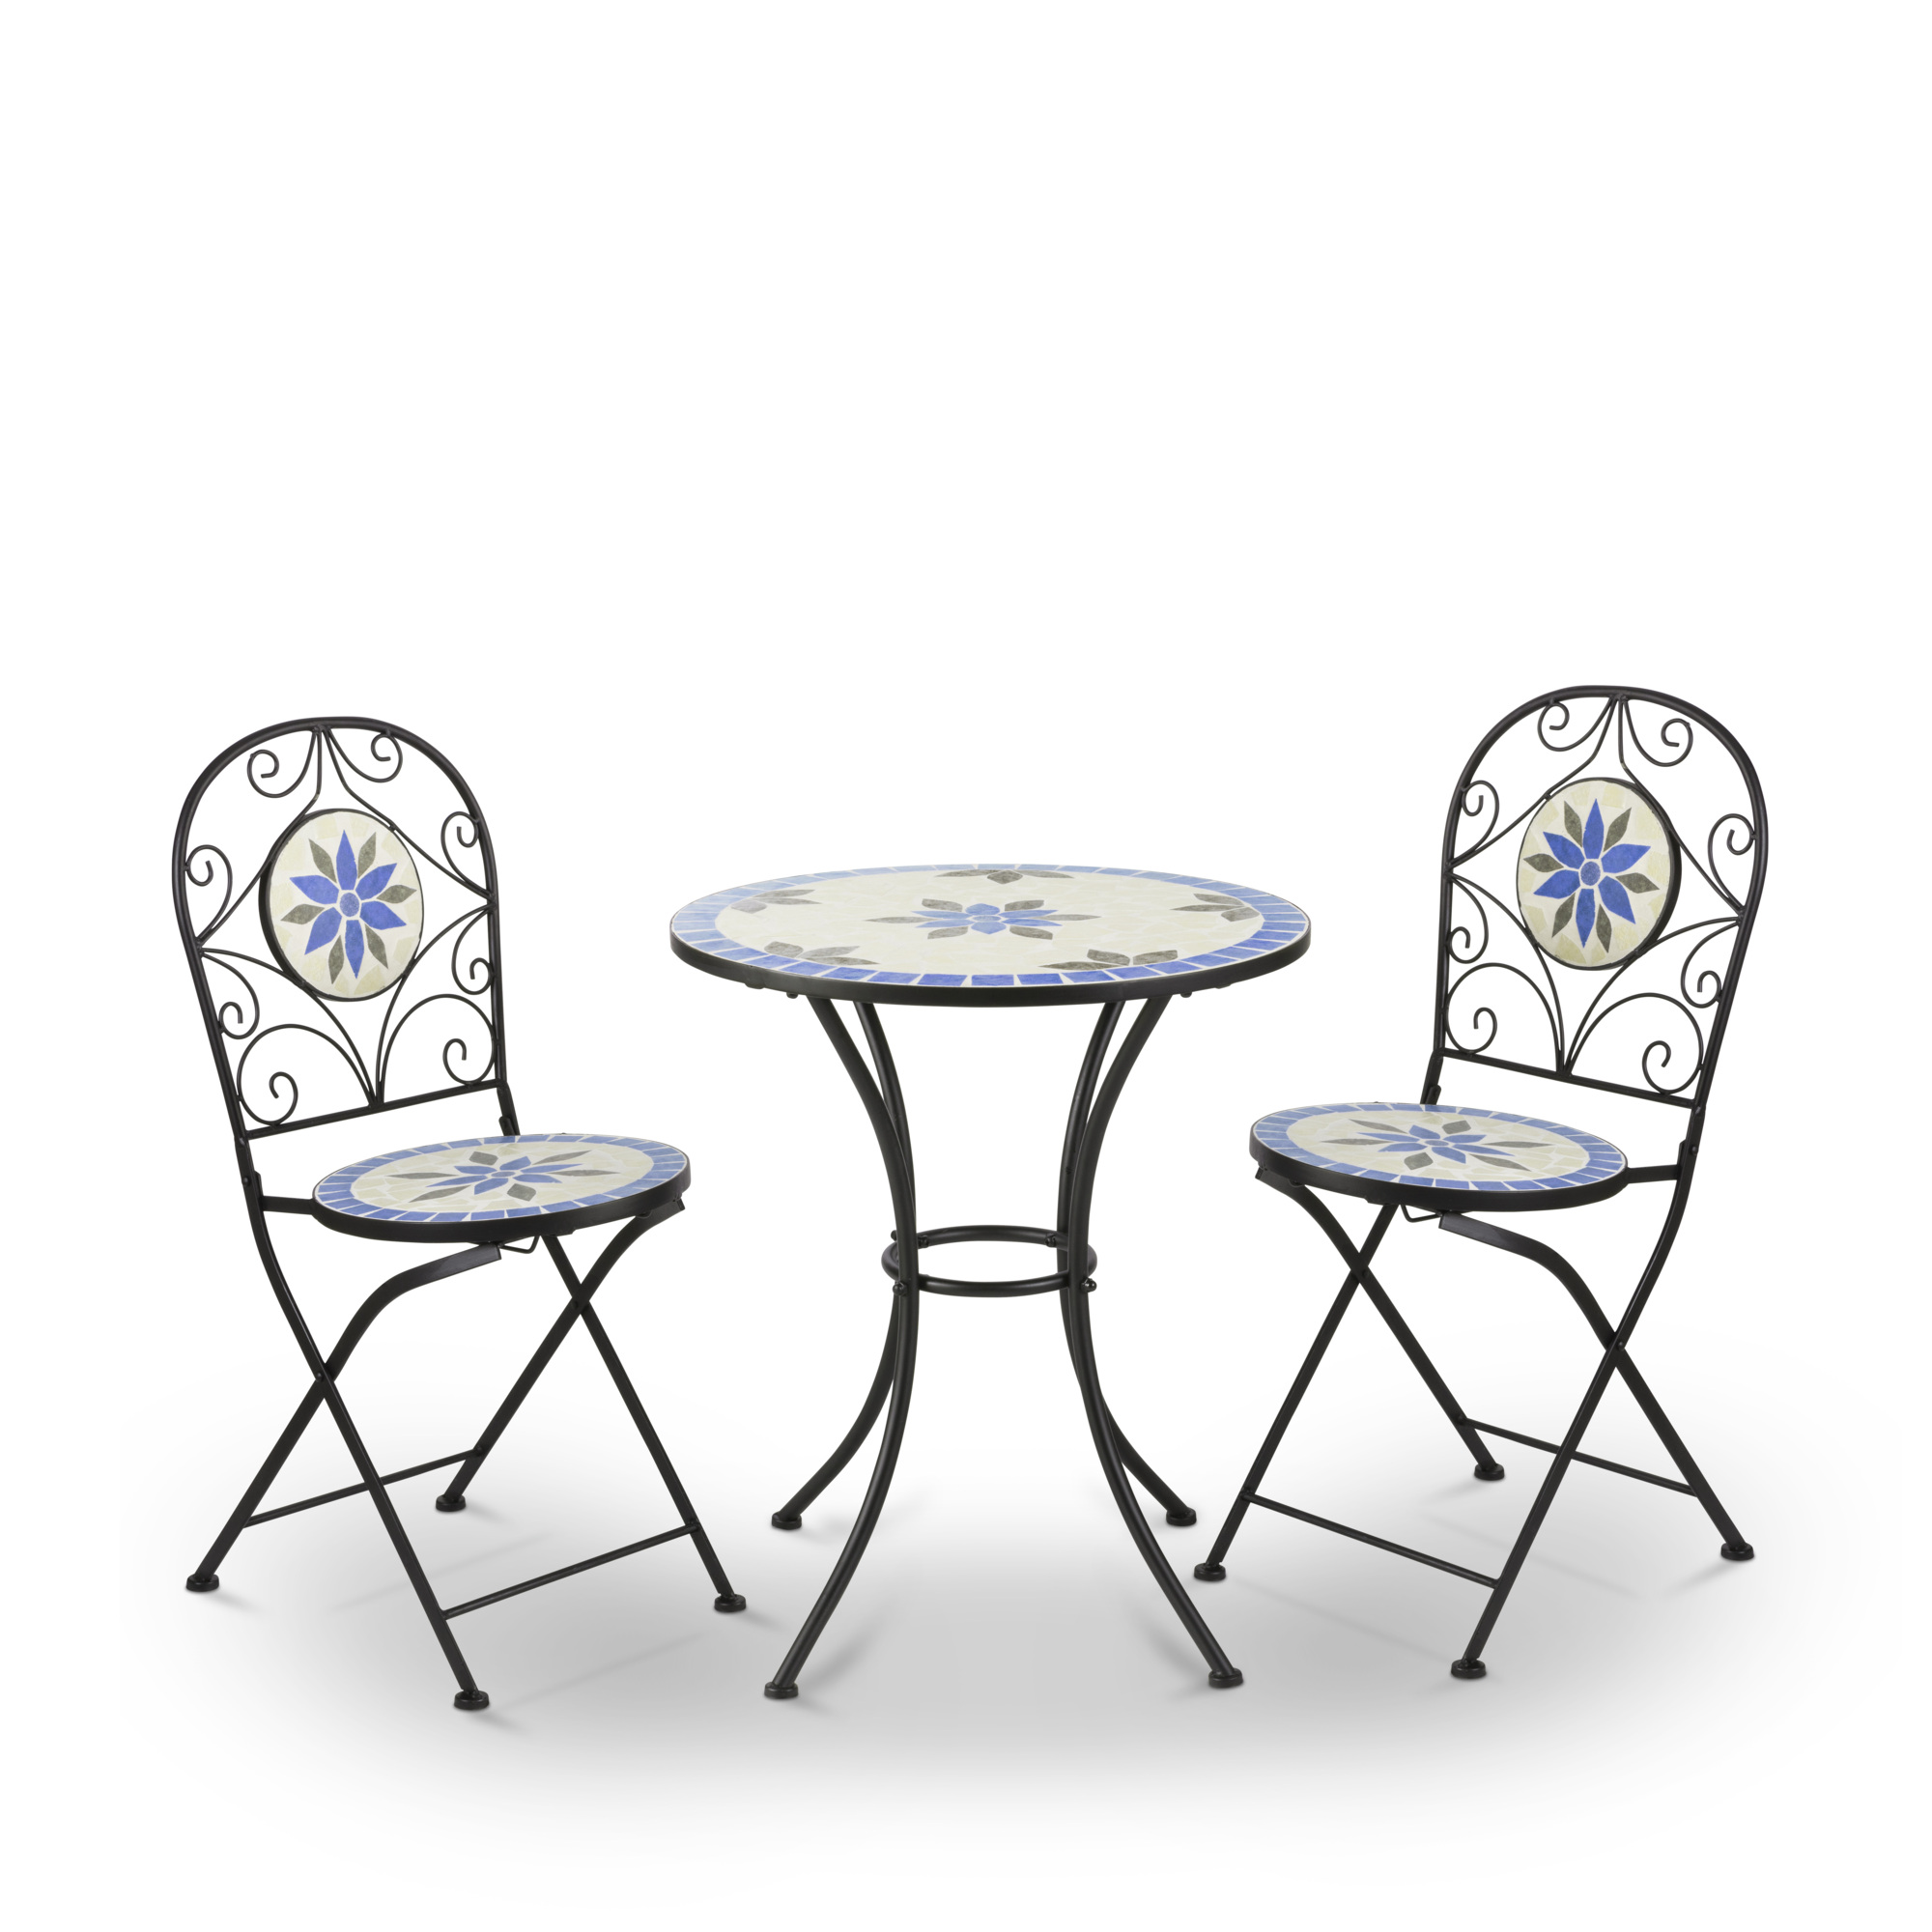 Alpine Corporation, Mosaic Folding Bistro Set,3-Piece,Blue and Beige, Pieces (qty.) 3 Primary Color Other, Seating Capacity 2 Model JFH1284A